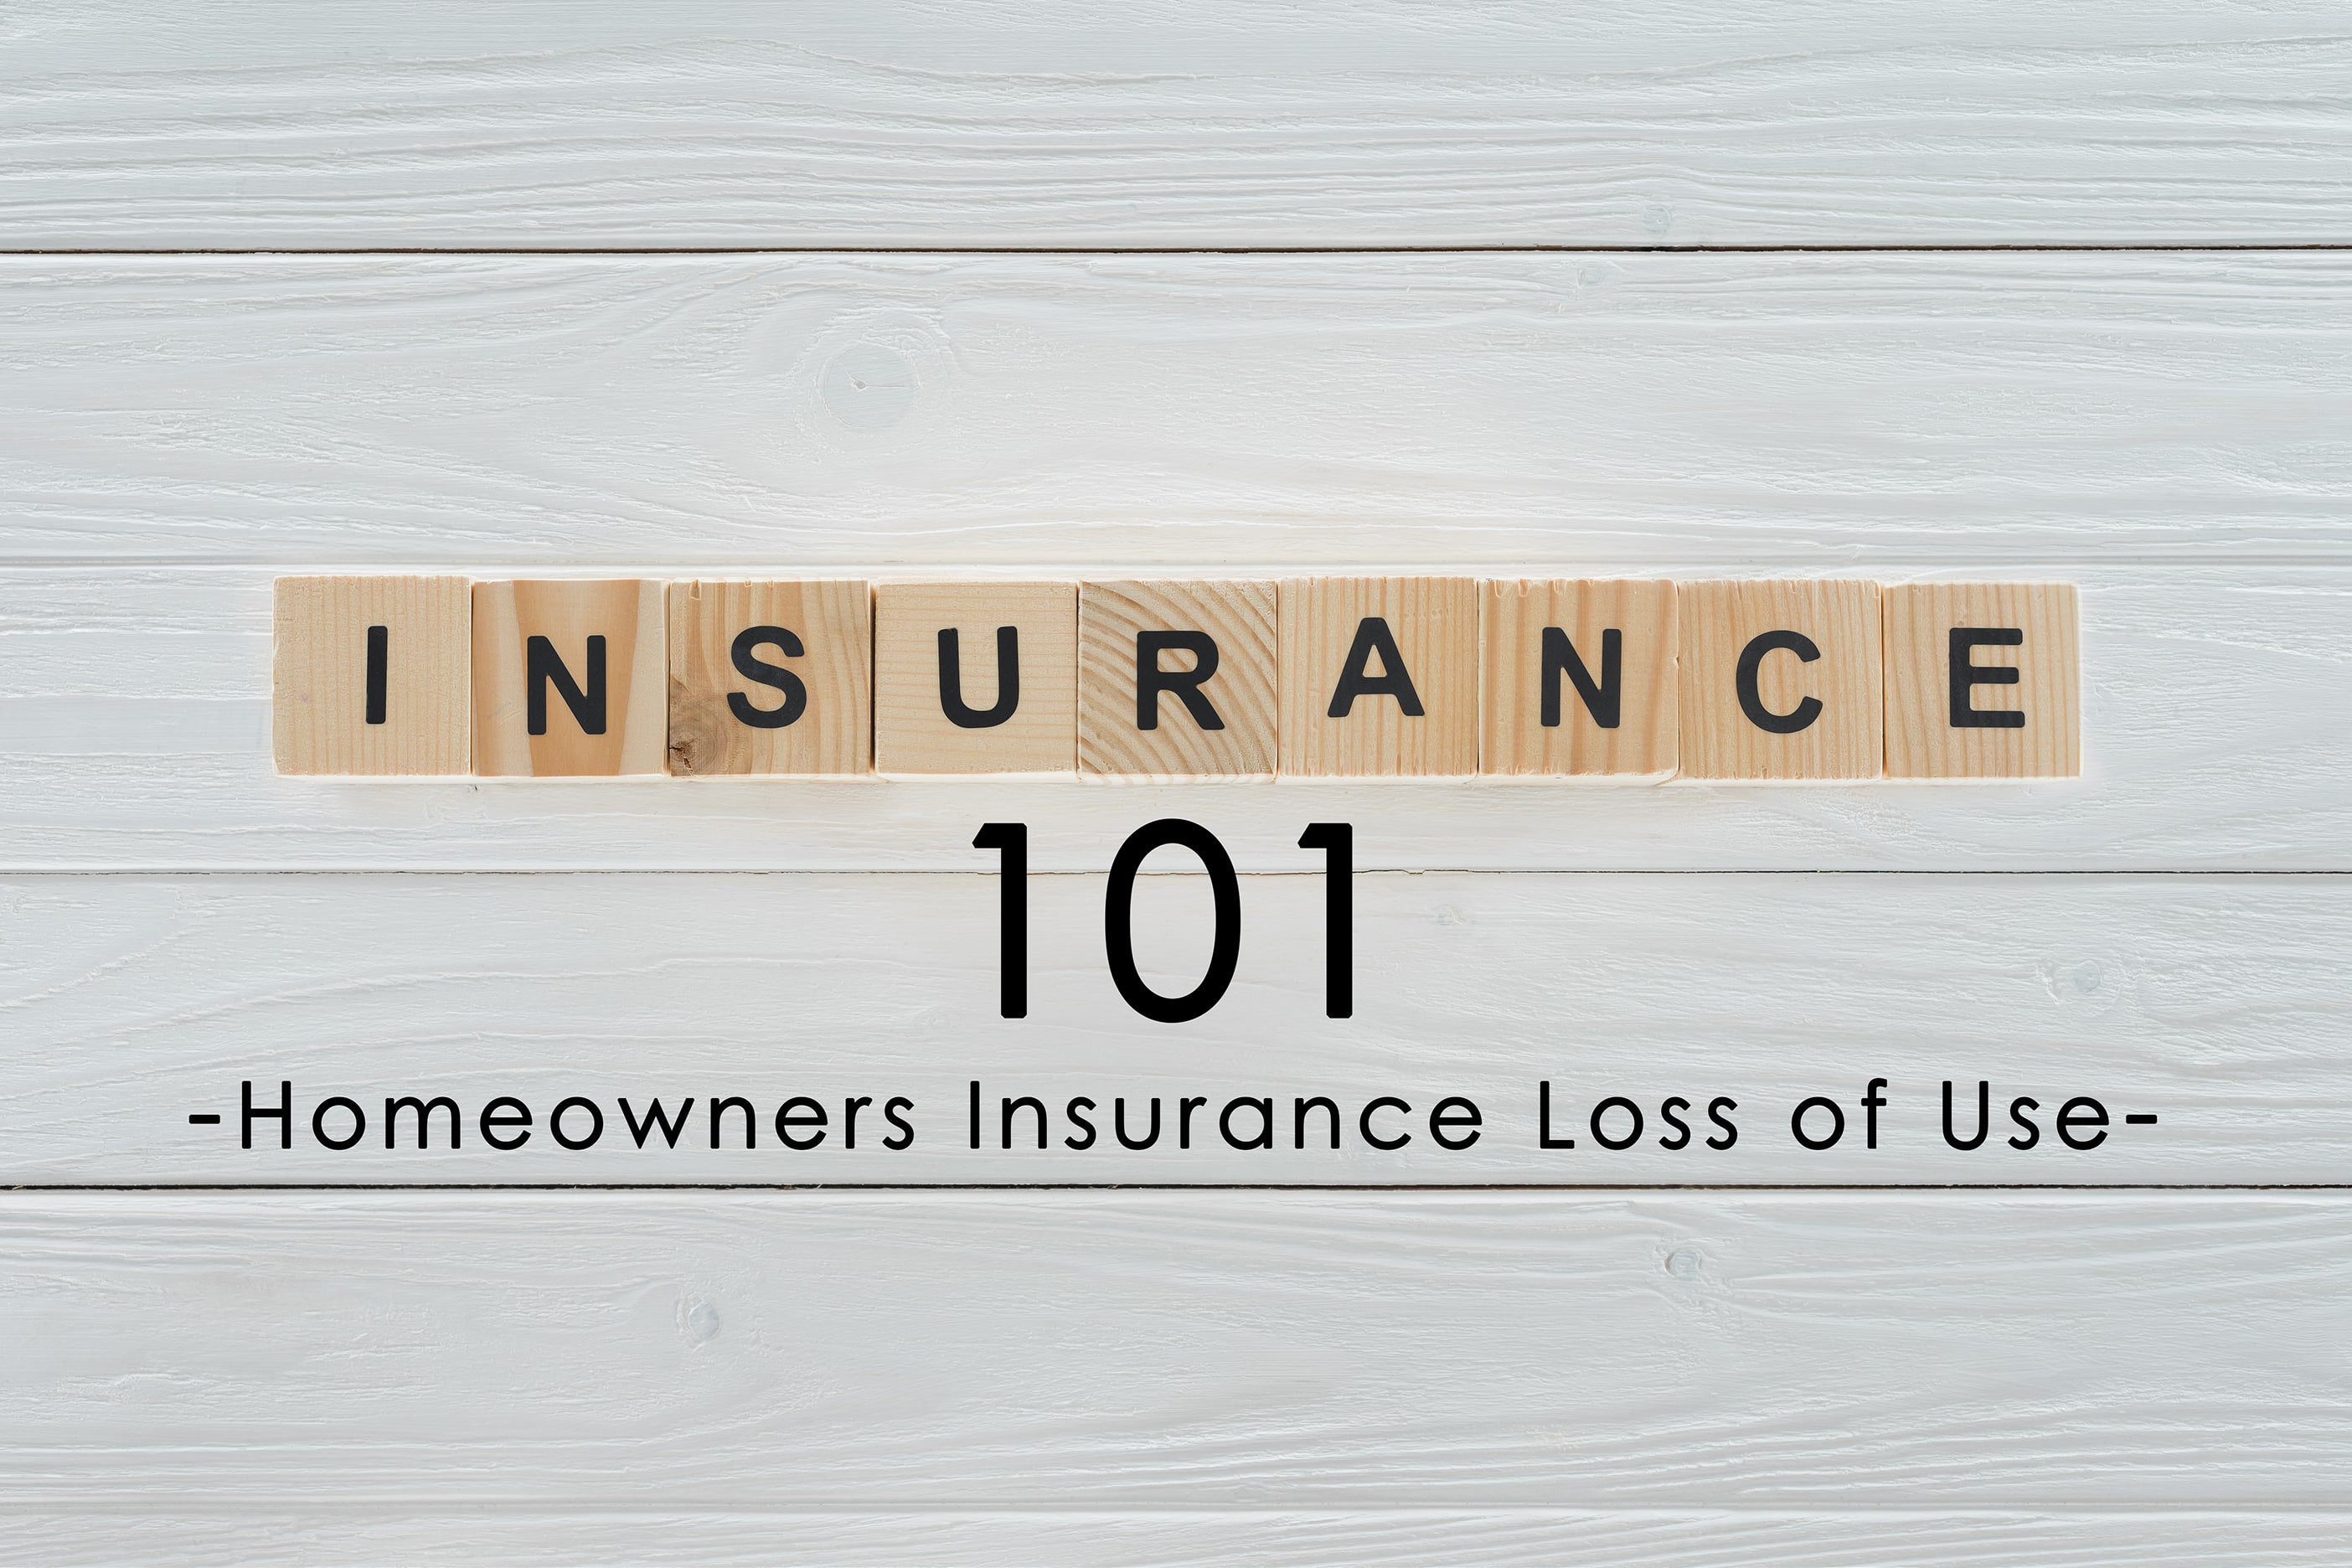 Insurance Term of the Day -Homeowners Insurance Loss of Use